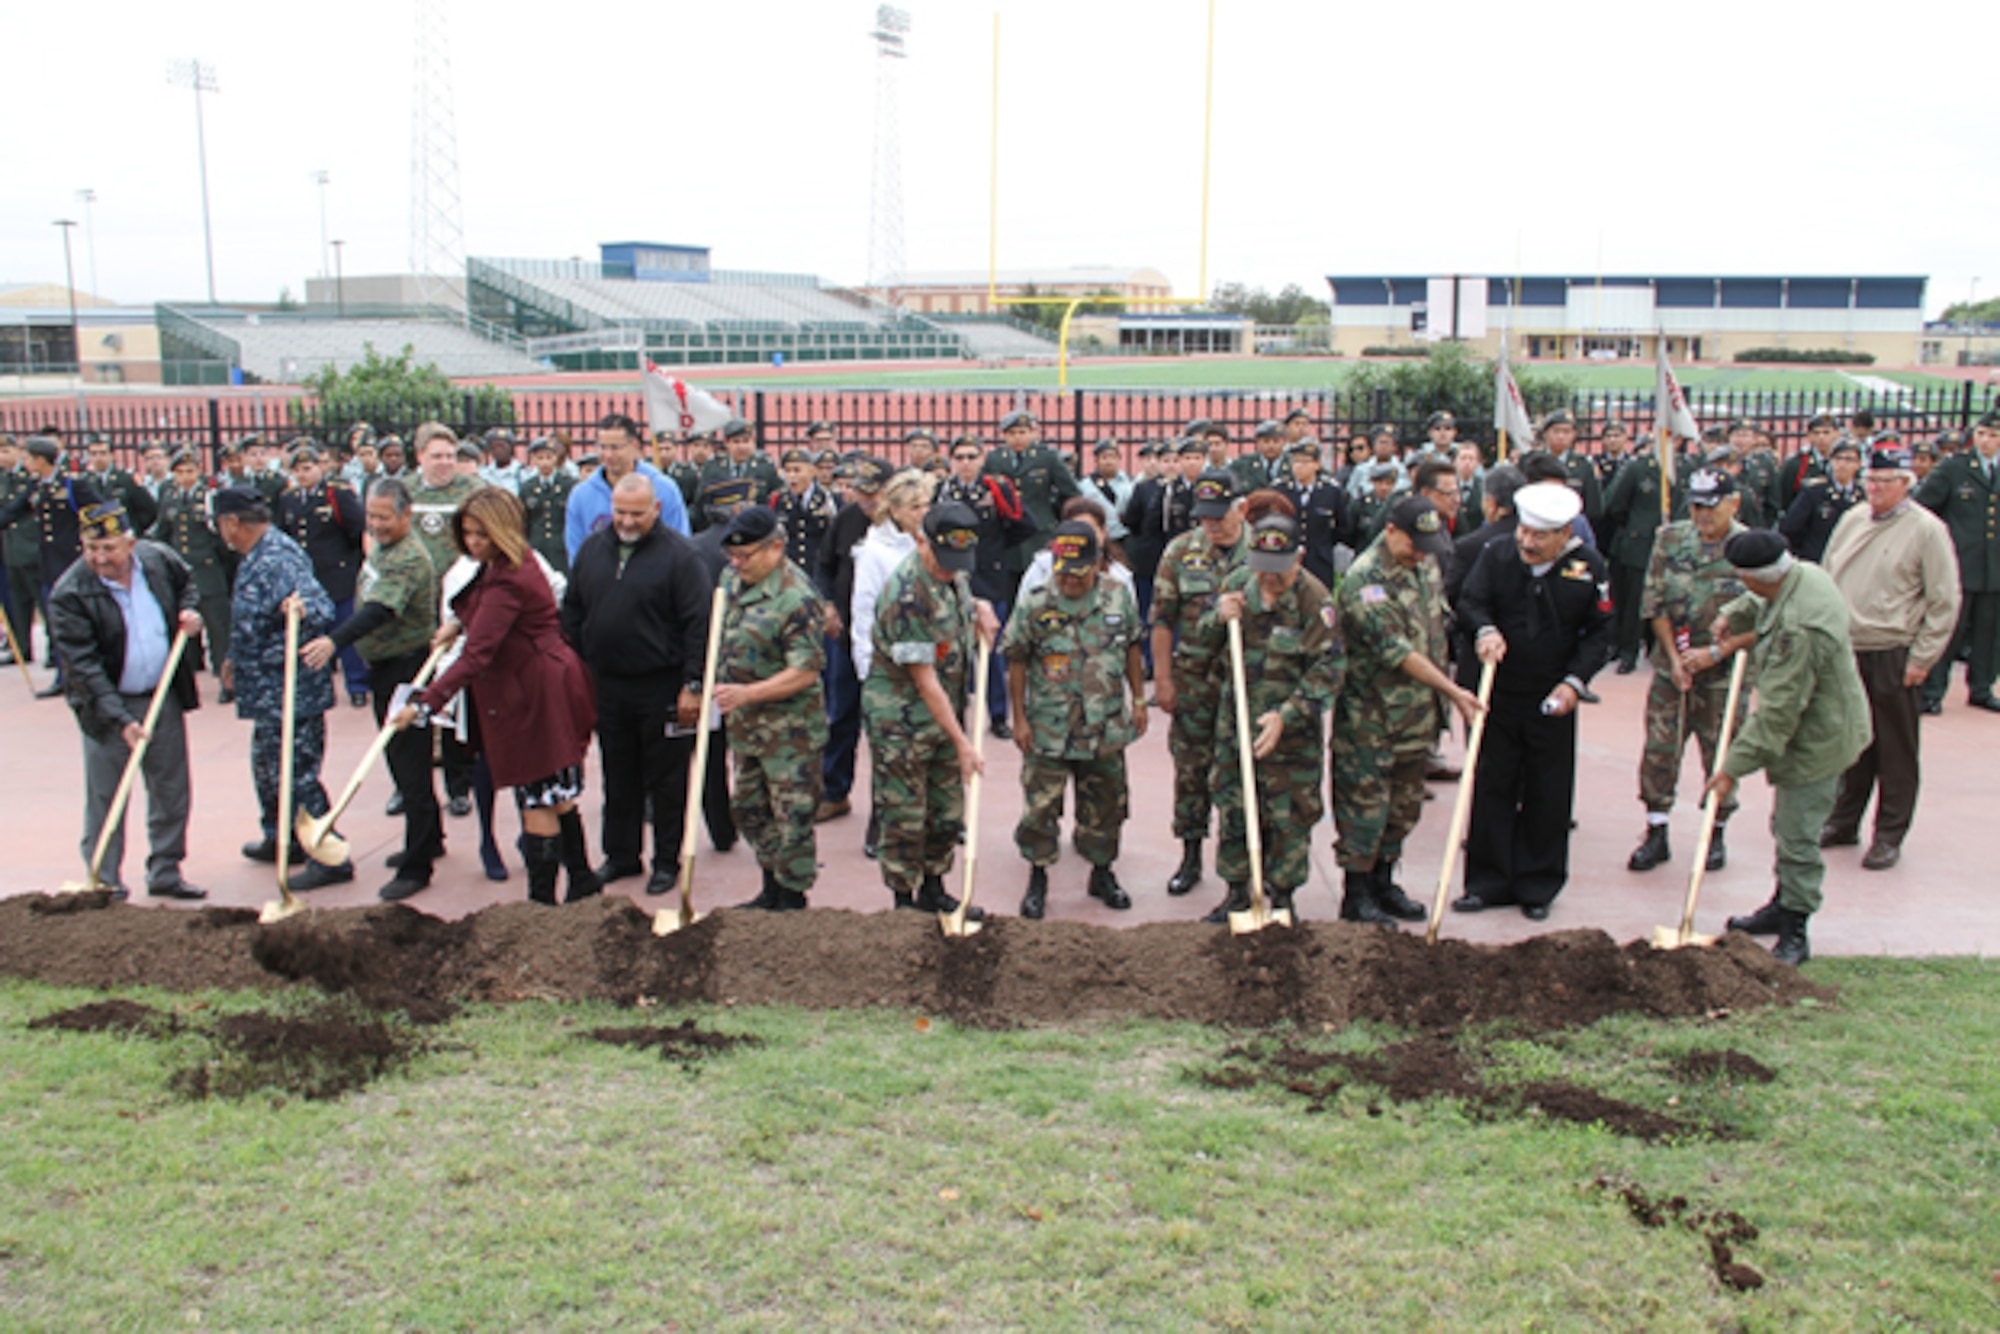 A groundbreaking ceremony was held at South San Antonio High School, Nov. 11, 2014, for a veteran’s memorial that will be erected on the campus later next year. The memorial is meant to commemorate native San Antonio veterans, from across the military services, who have lost their lives serving their country. (Courtesy Photo) 